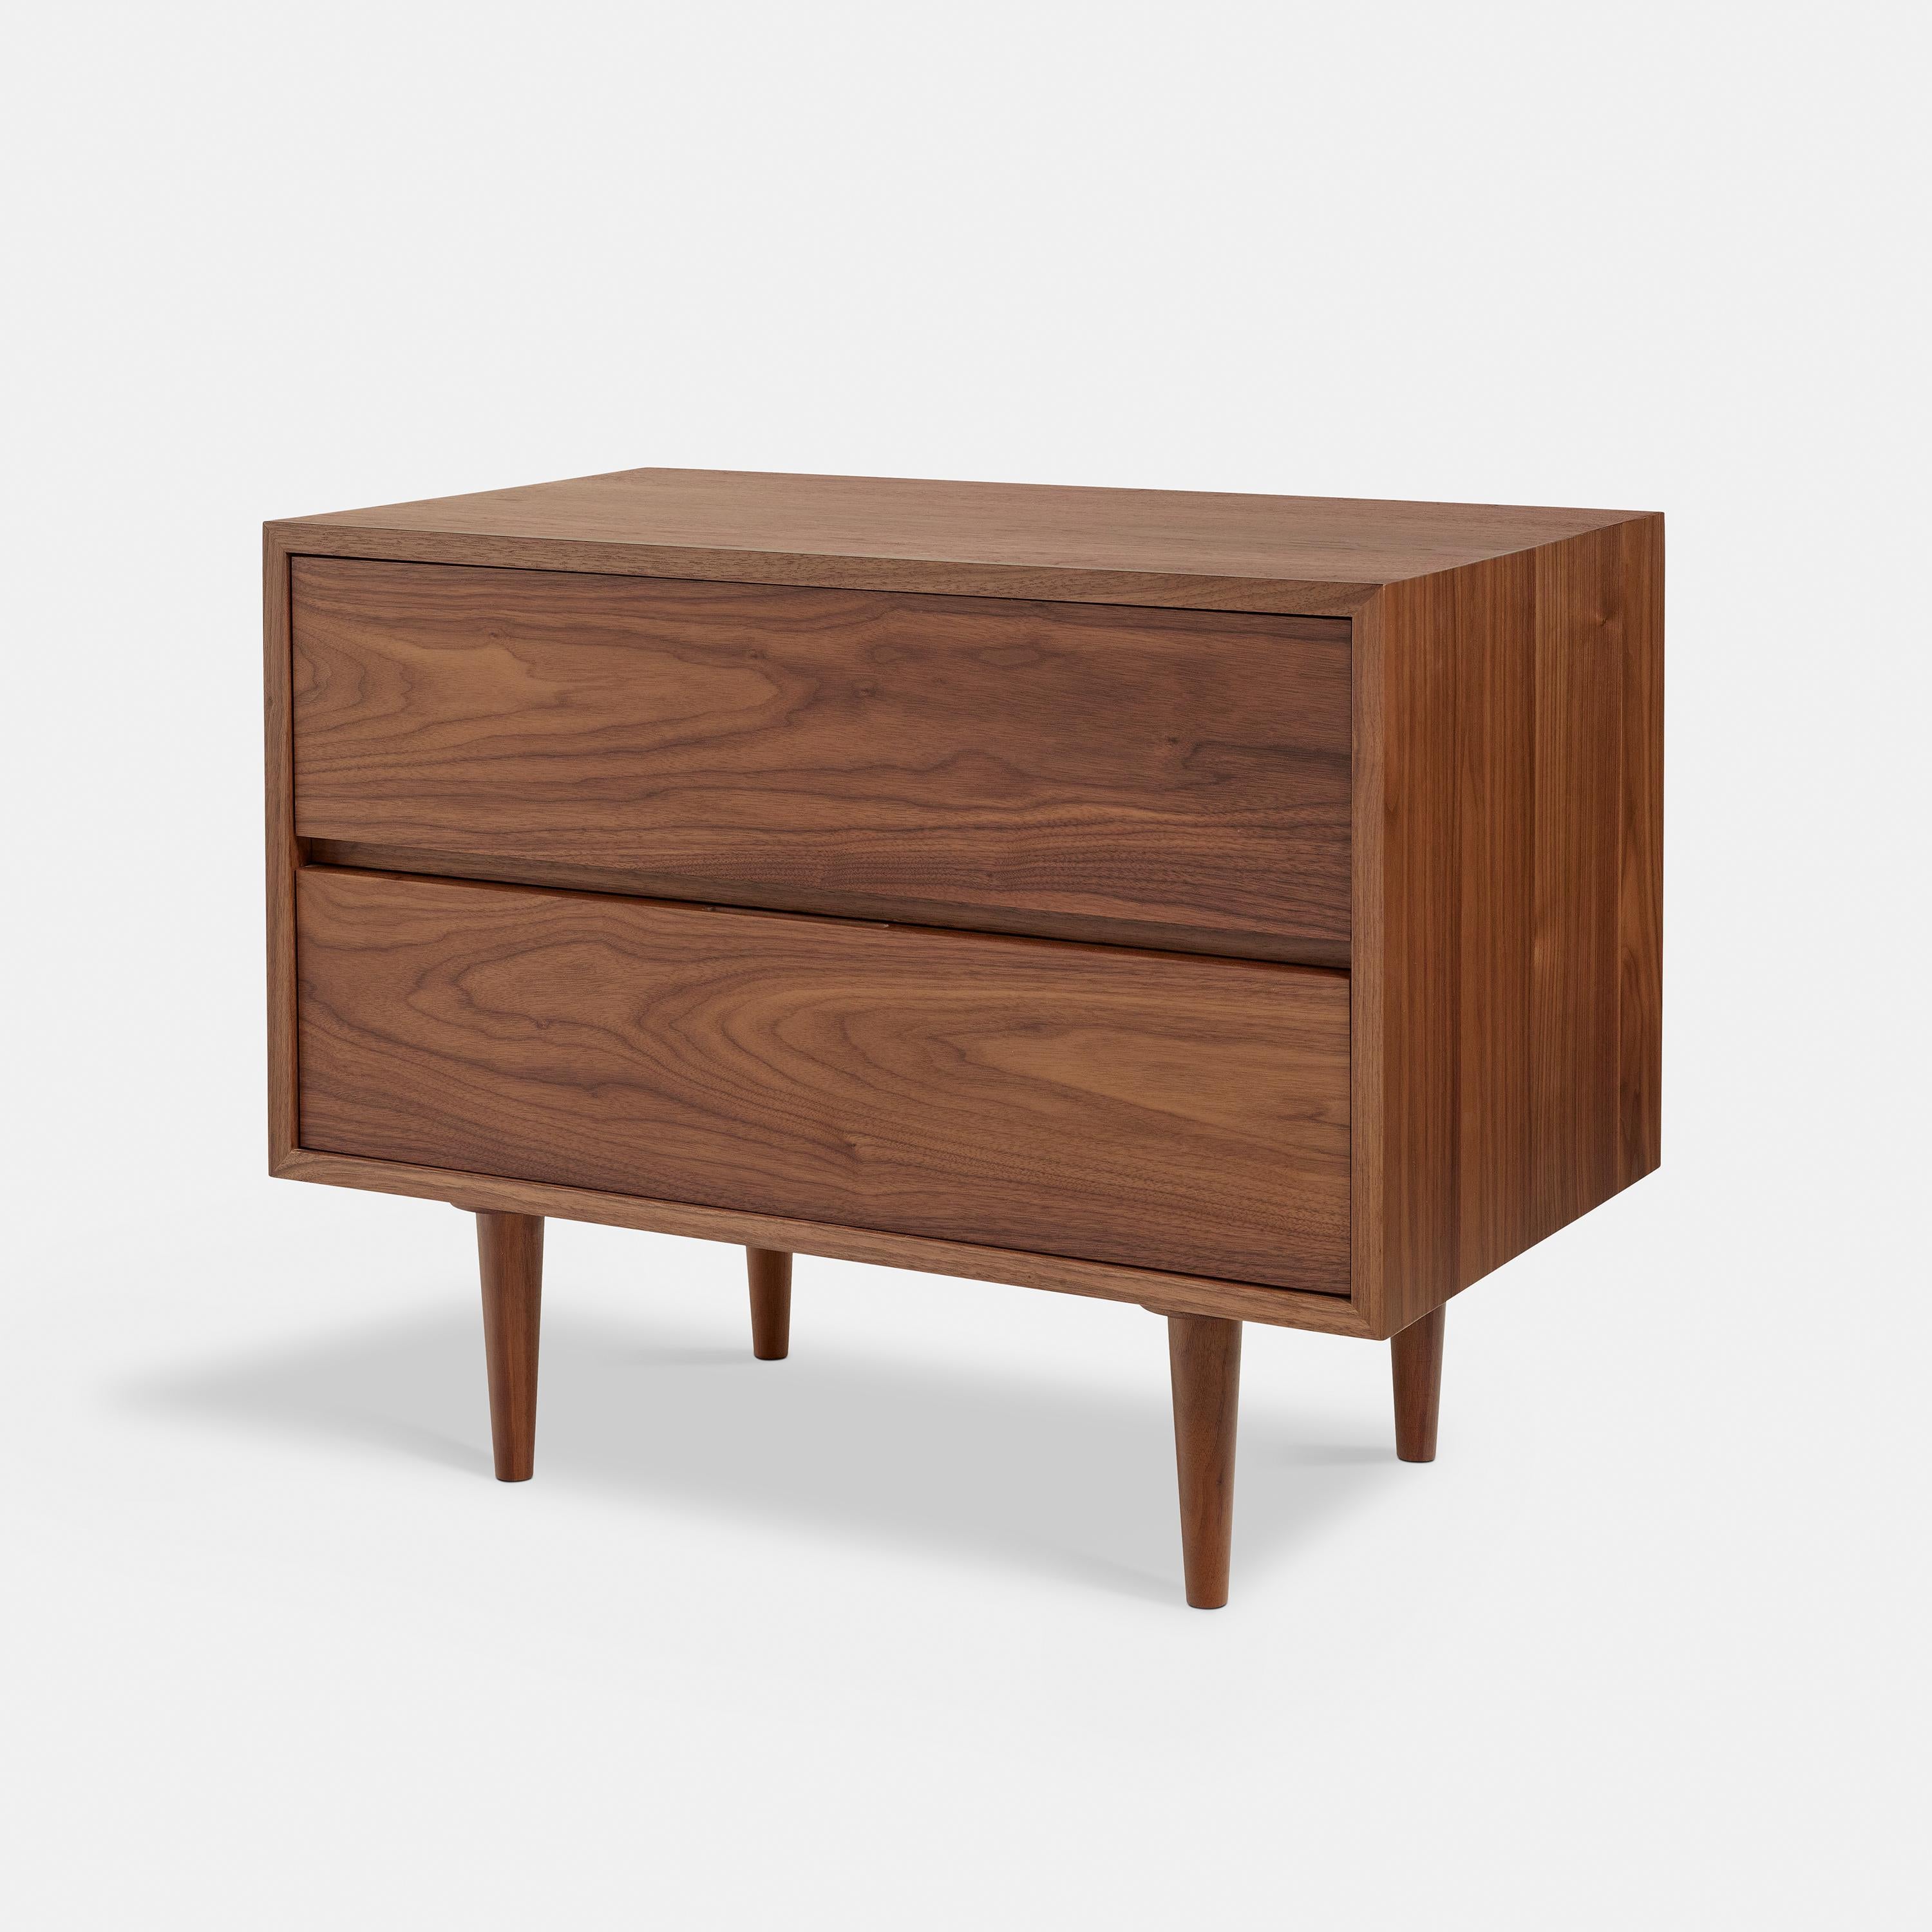 Exuding mid-century appeal through its simple elegance, the Bedside Table is a welcome addition to the Smilow Bedroom Collection. The table features two drawers and is built entirely from solid wood. Additionally, the table is wide enough to